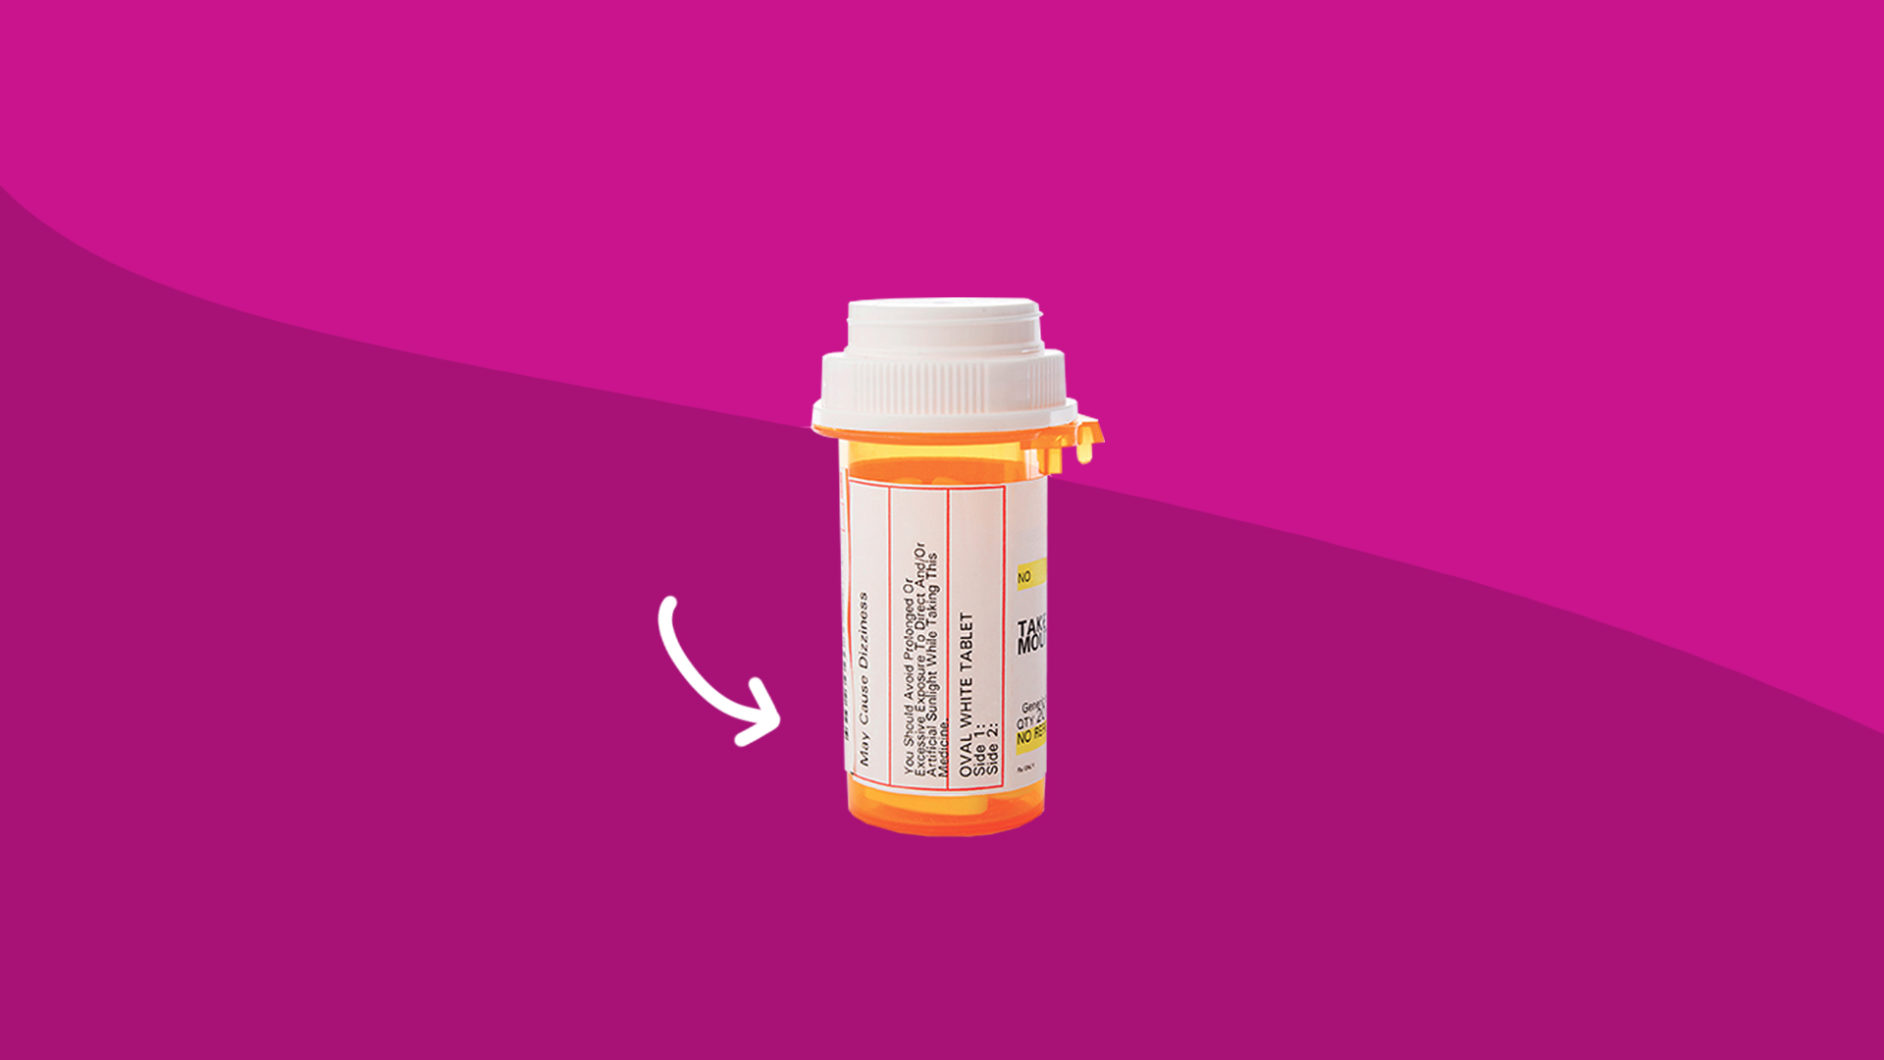 A jar of medication represents side effects